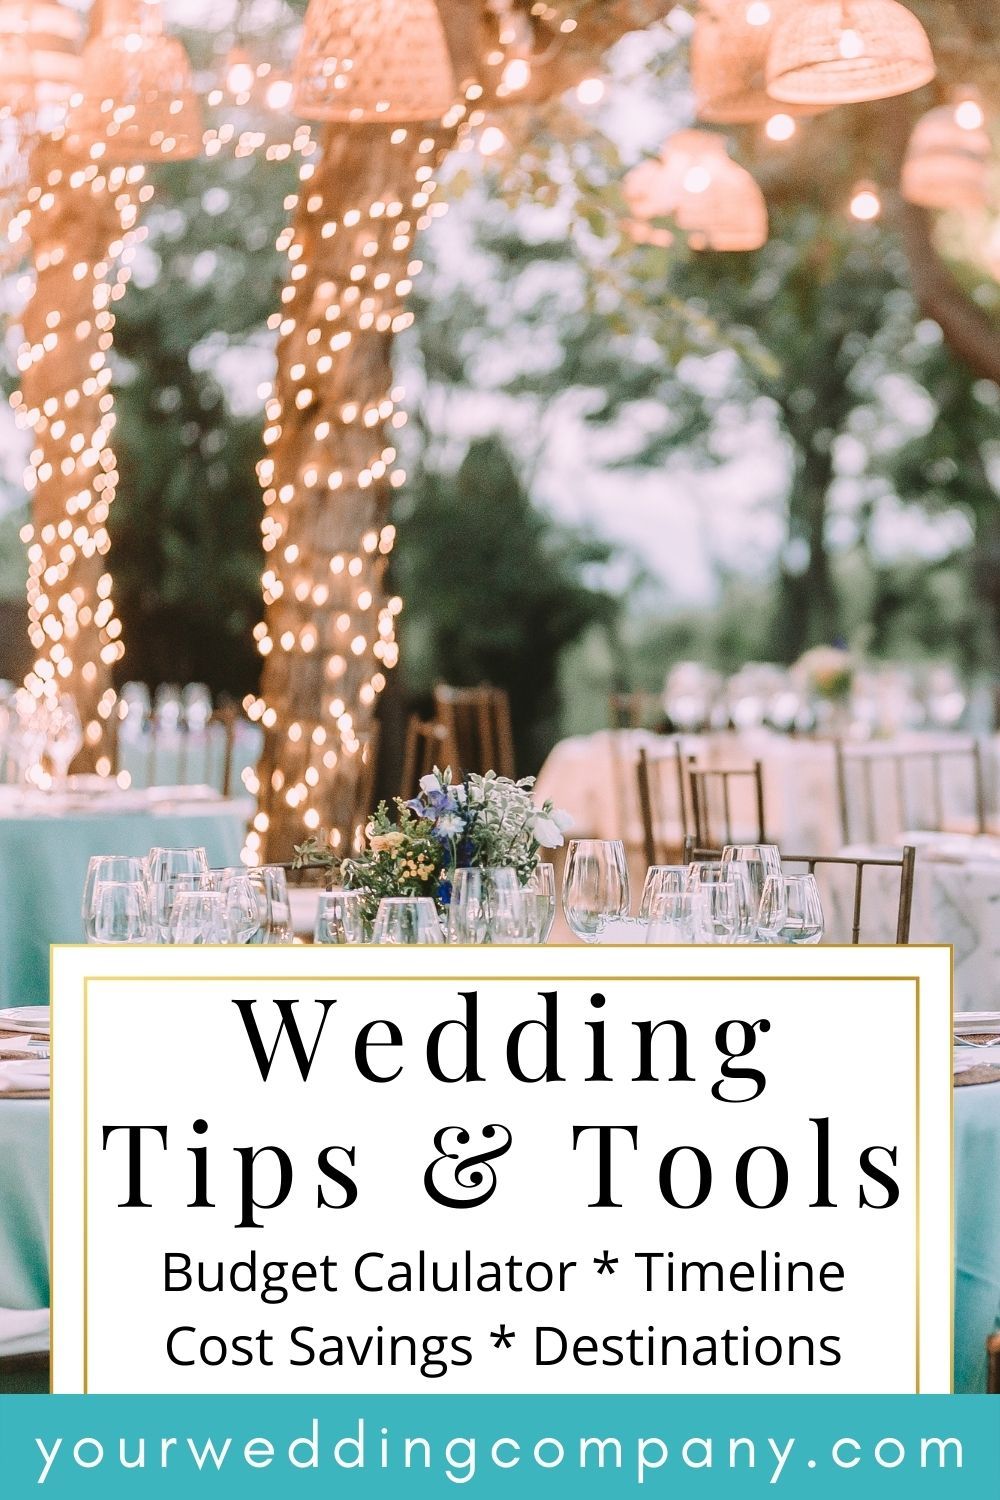 Wedding Planning Tips and Tools